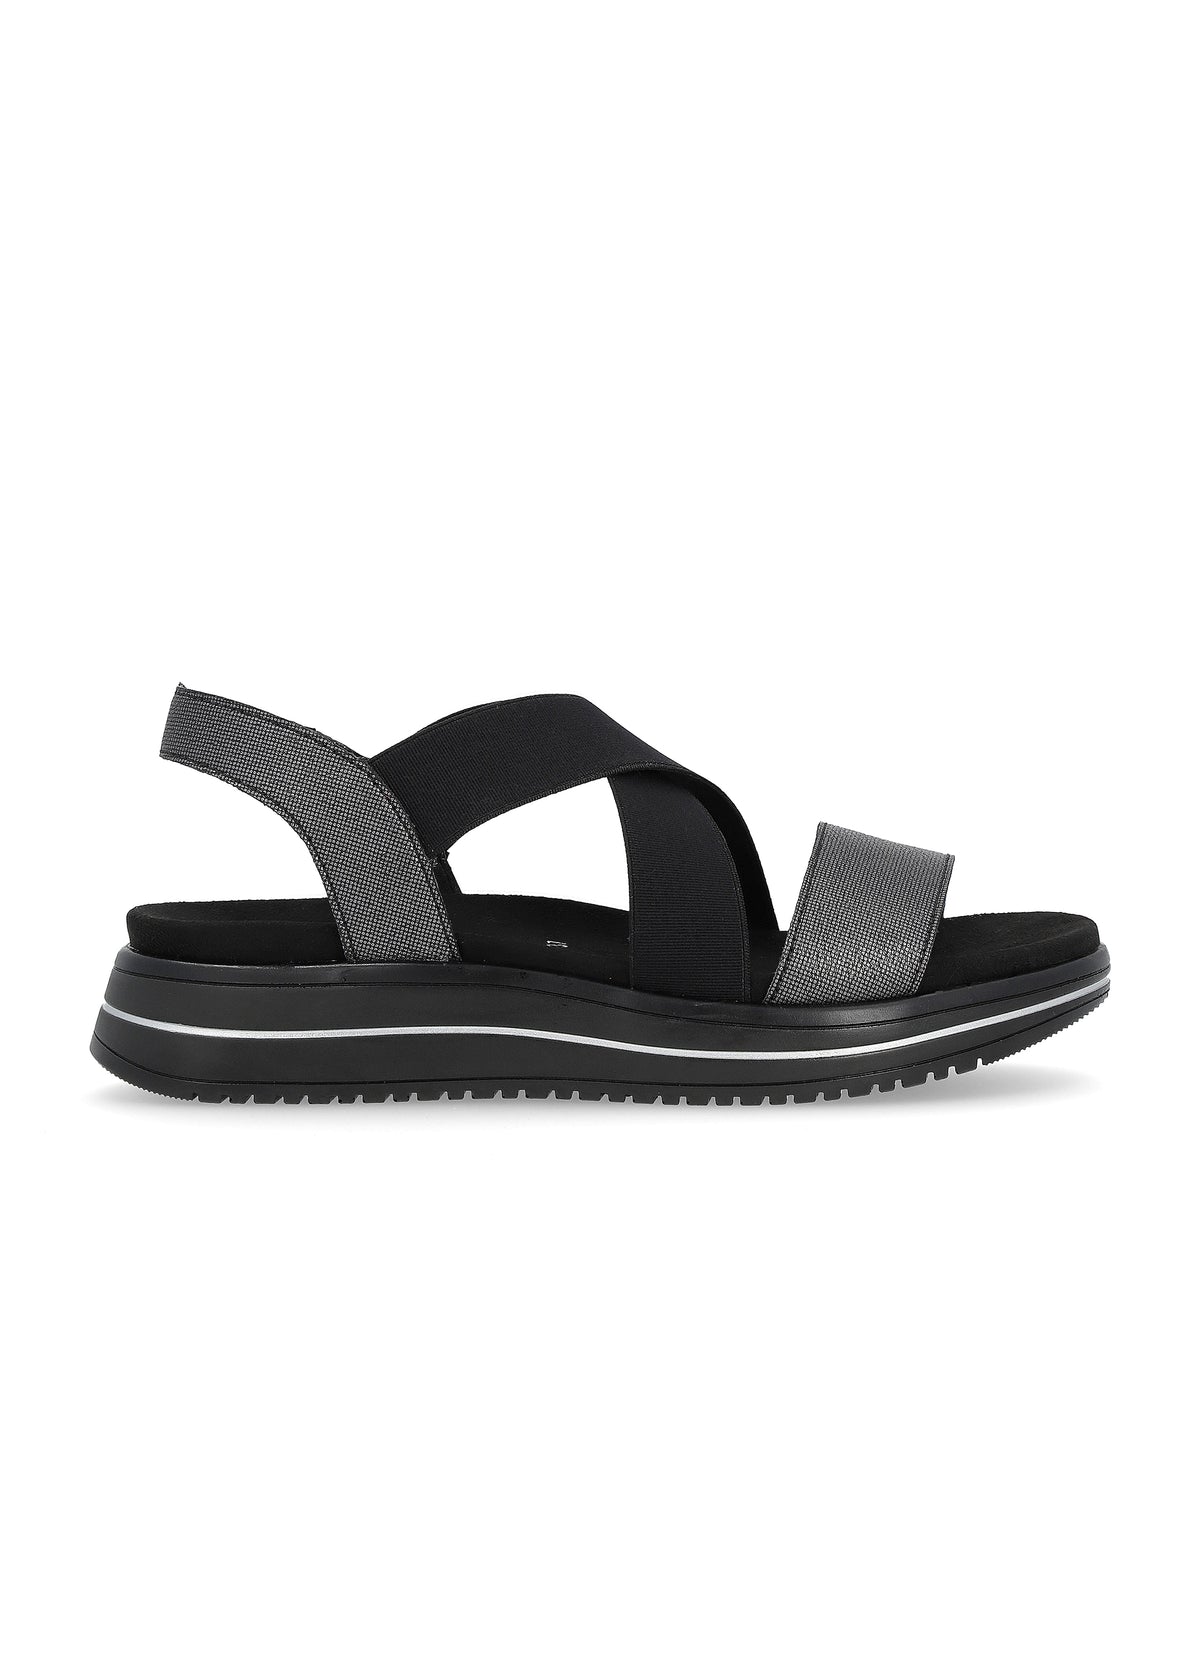 Sandals with a thick sole - black, elastic straps